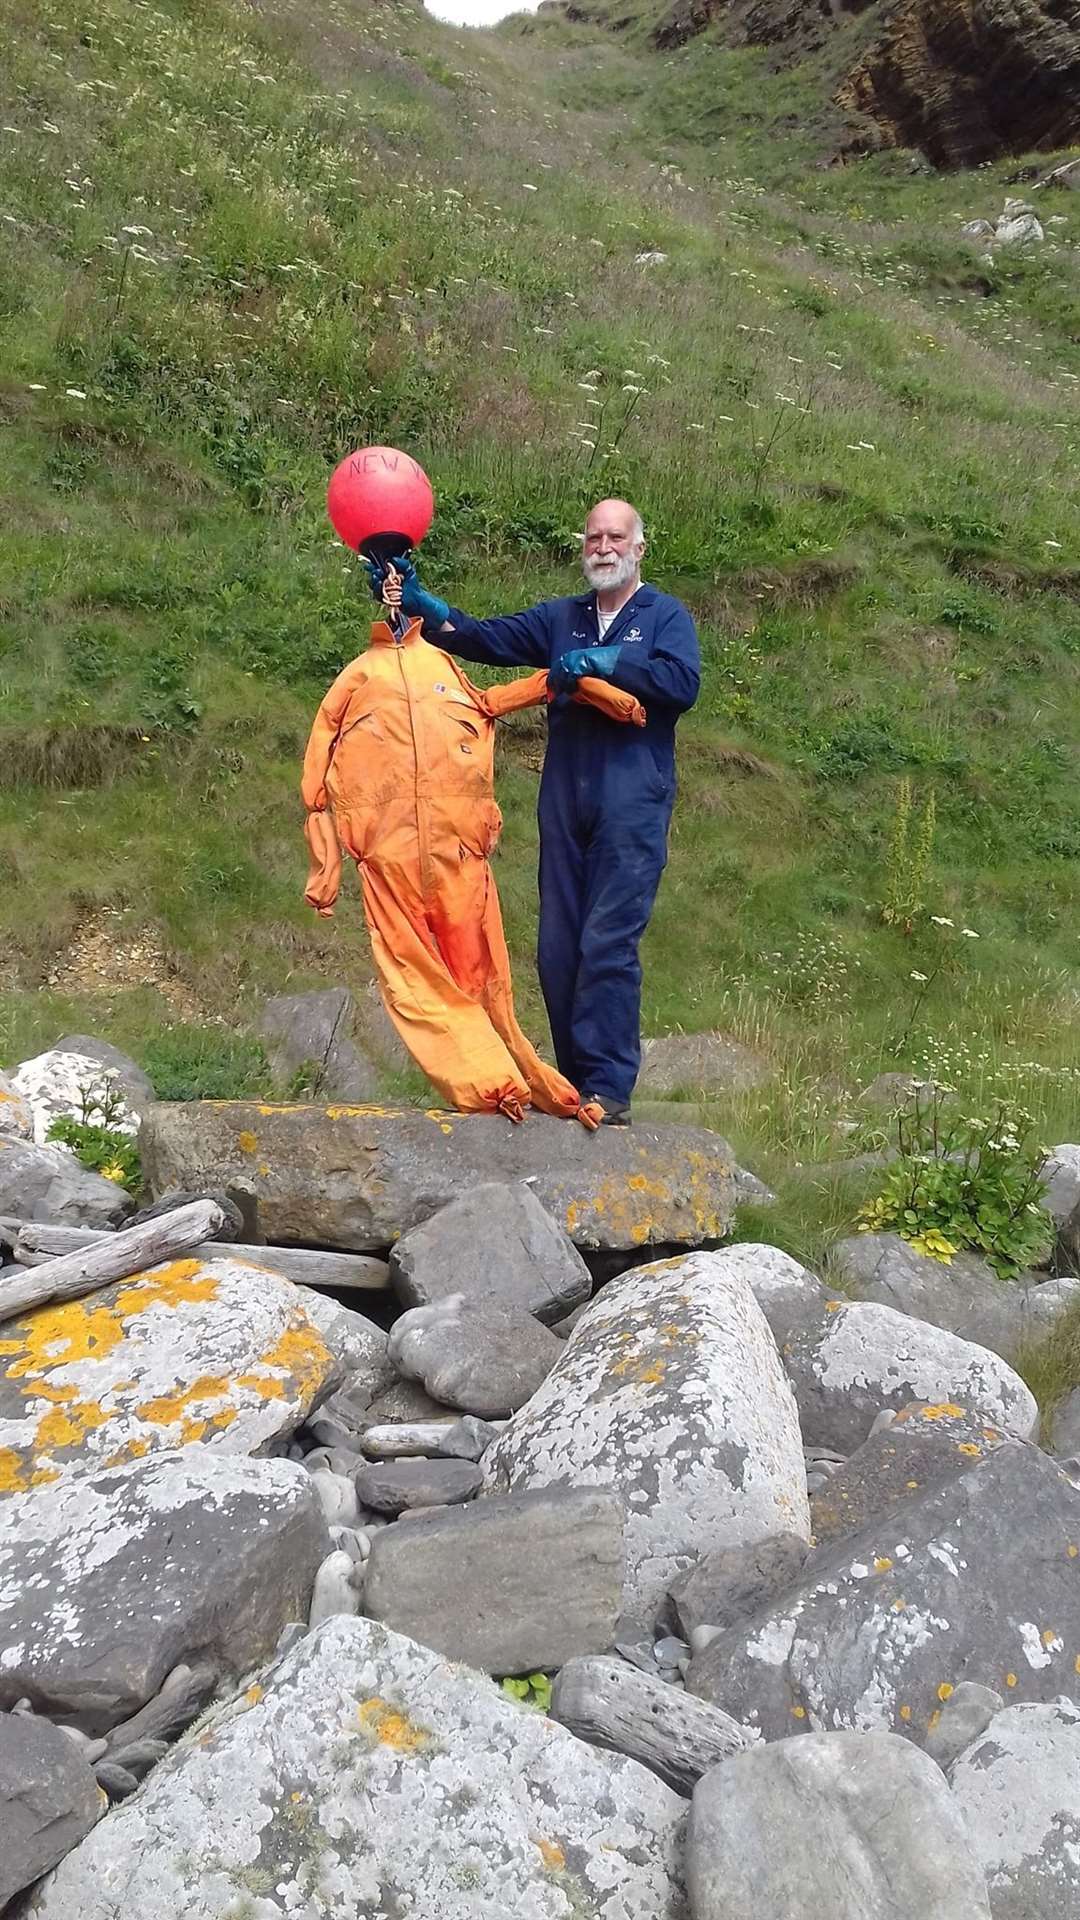 Dorcas Sinclair said: 'We think this was a man overboard practice dummy, gave us a bit of a fright when we saw it laying in the rocks at Clyth.'